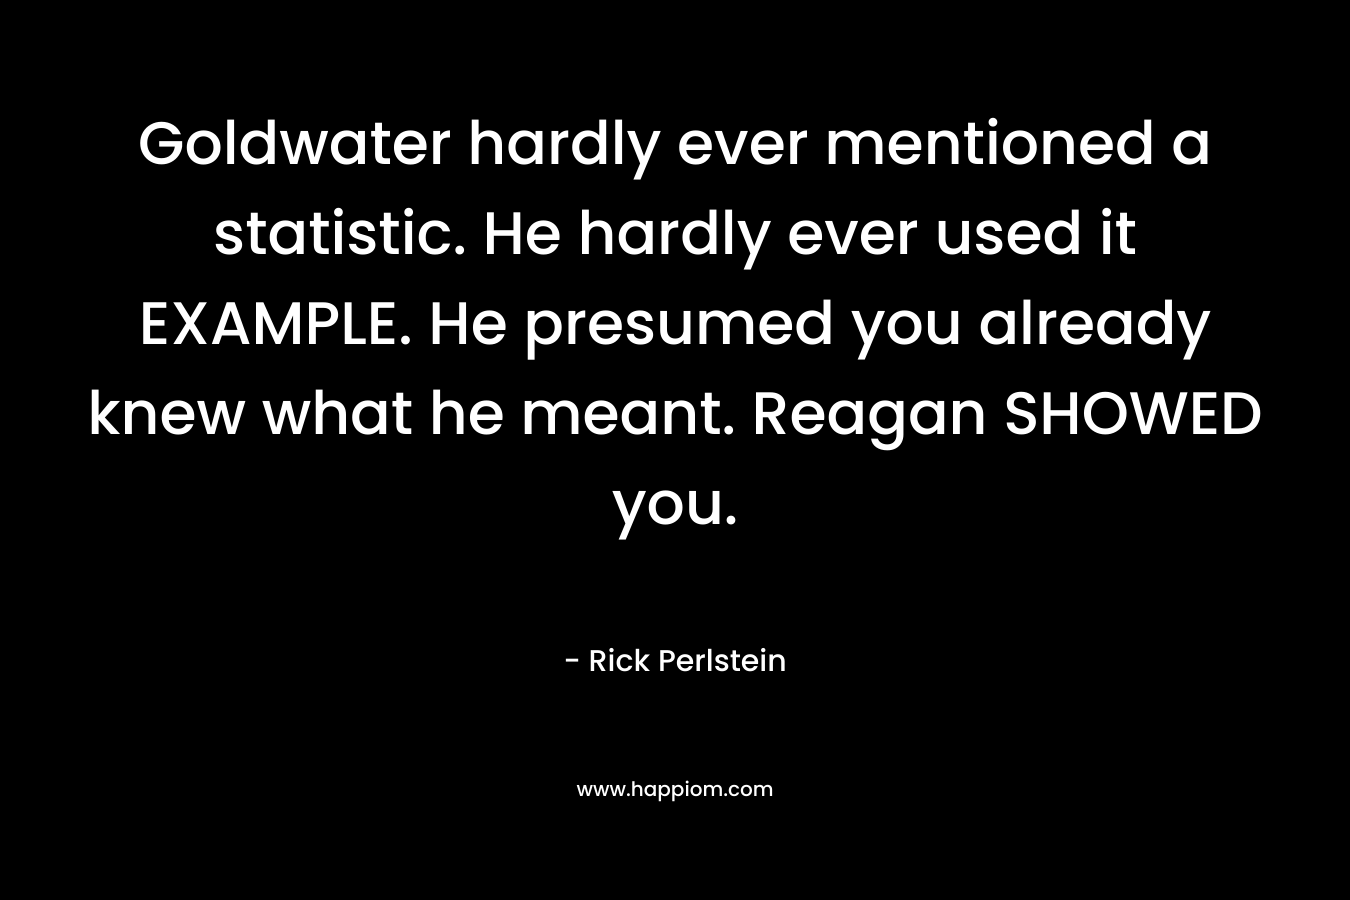 Goldwater hardly ever mentioned a statistic. He hardly ever used it EXAMPLE. He presumed you already knew what he meant. Reagan SHOWED you. – Rick Perlstein